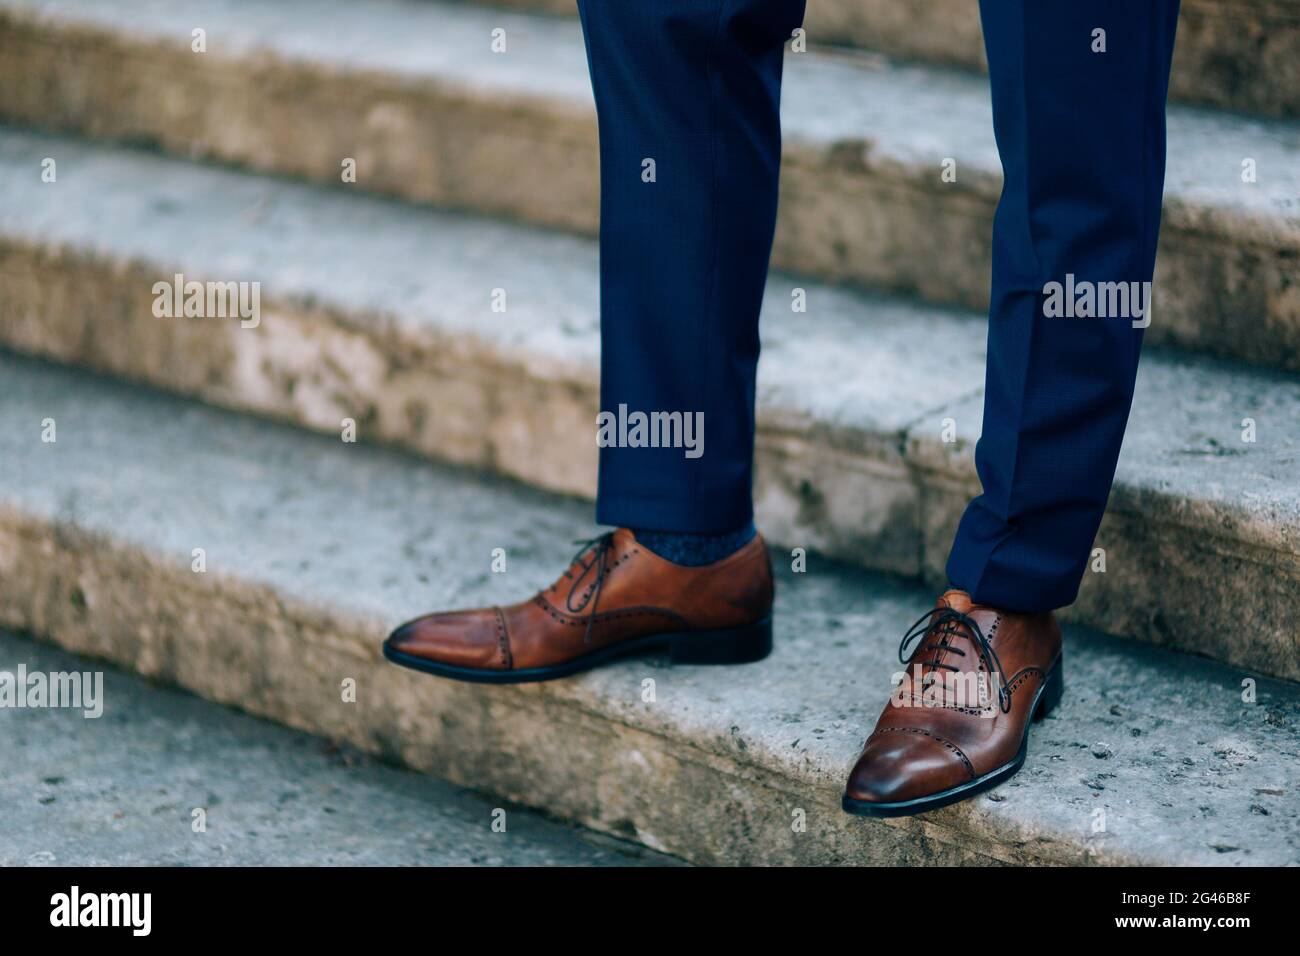 What color shoes should you wear with navy pants? - Quora